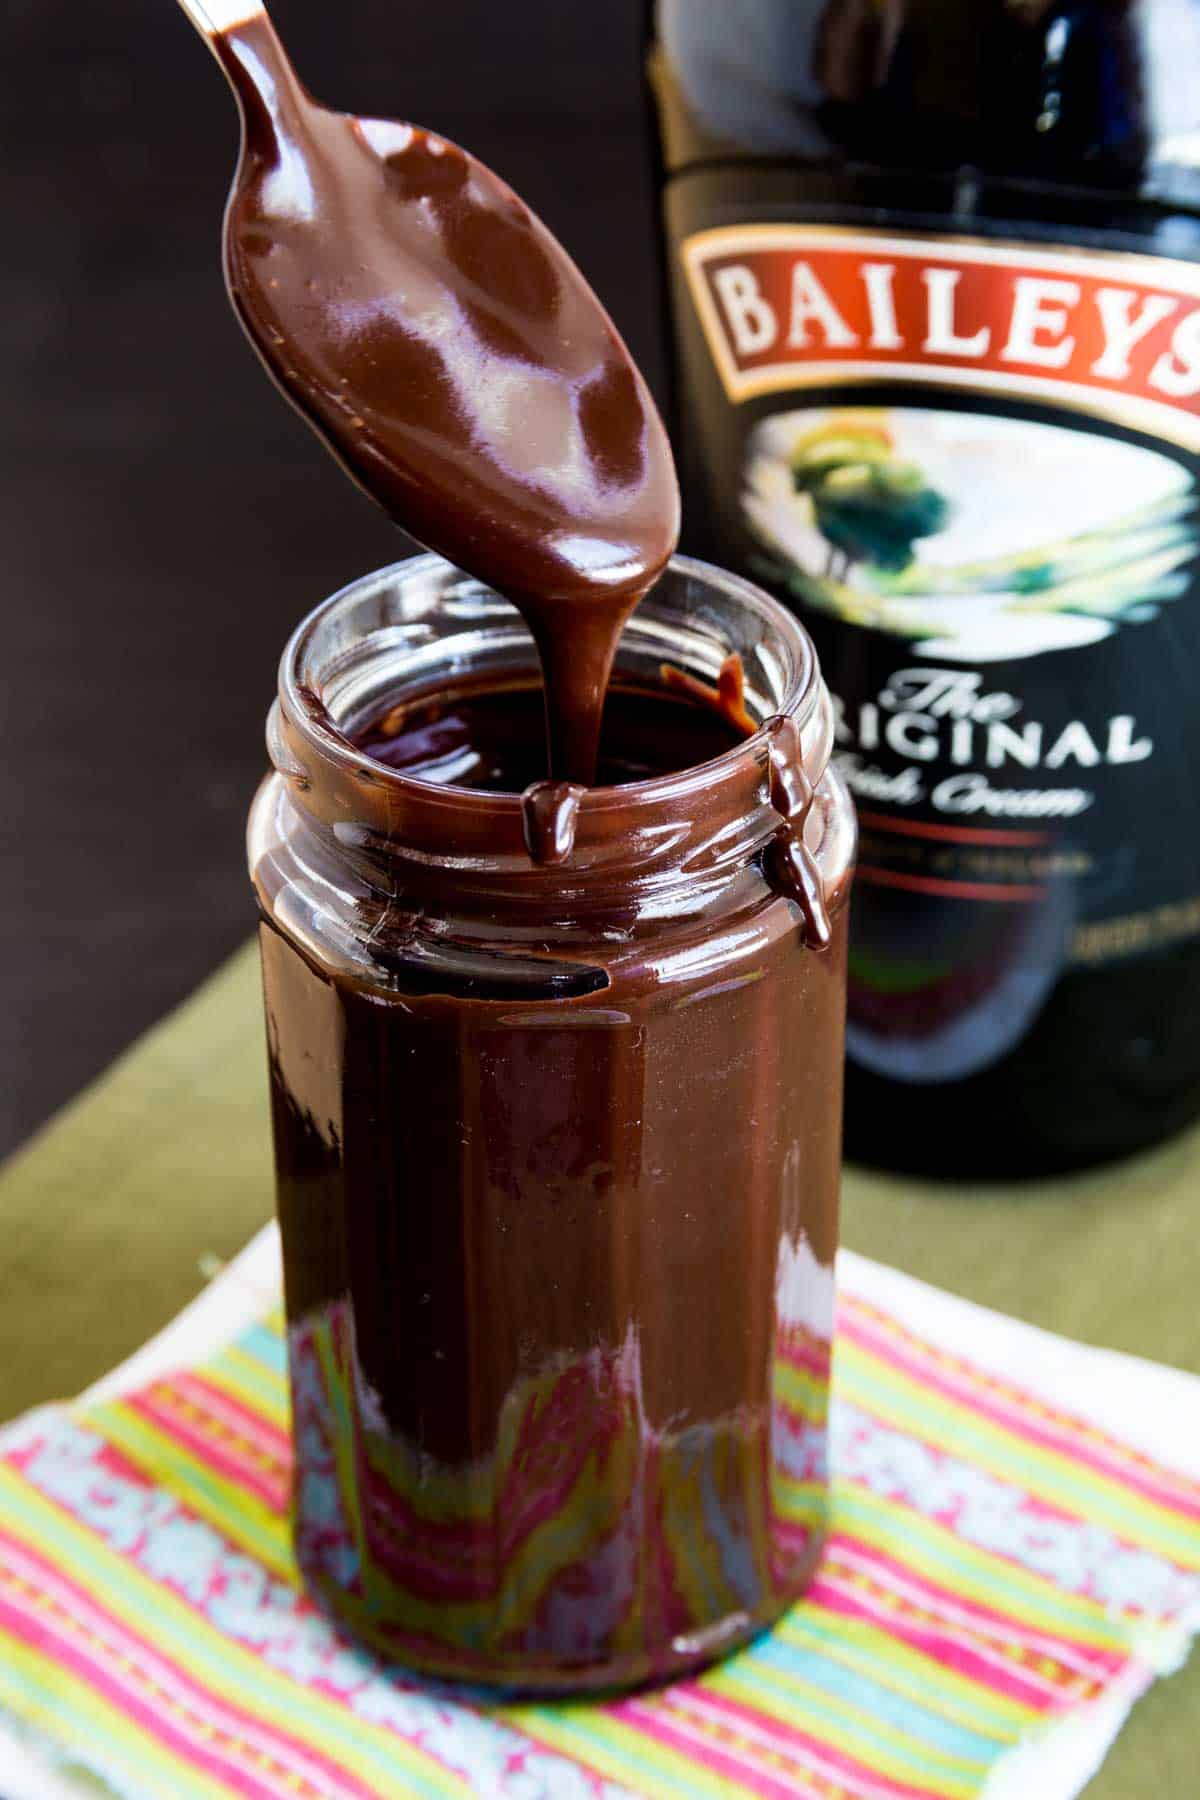 Thick chocolate sauc dripping off a spoon into a jar with a bottle of Bailey's Irish Cream in the background.